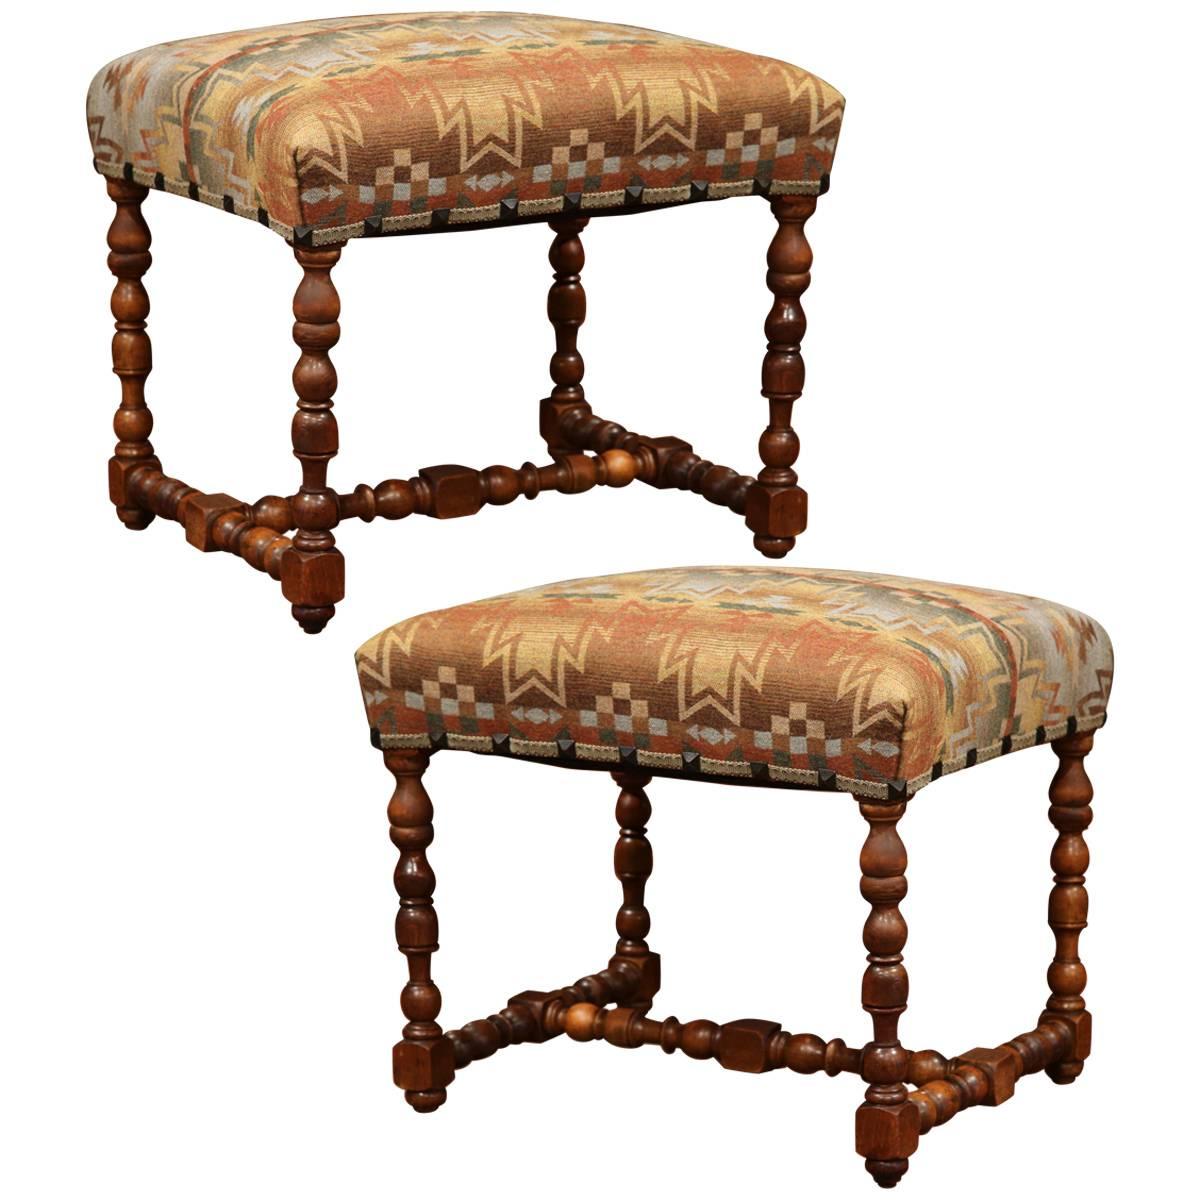 Pair of 19th Century, French, Louis XIII Walnut Stools with Ralph Lauren Fabric